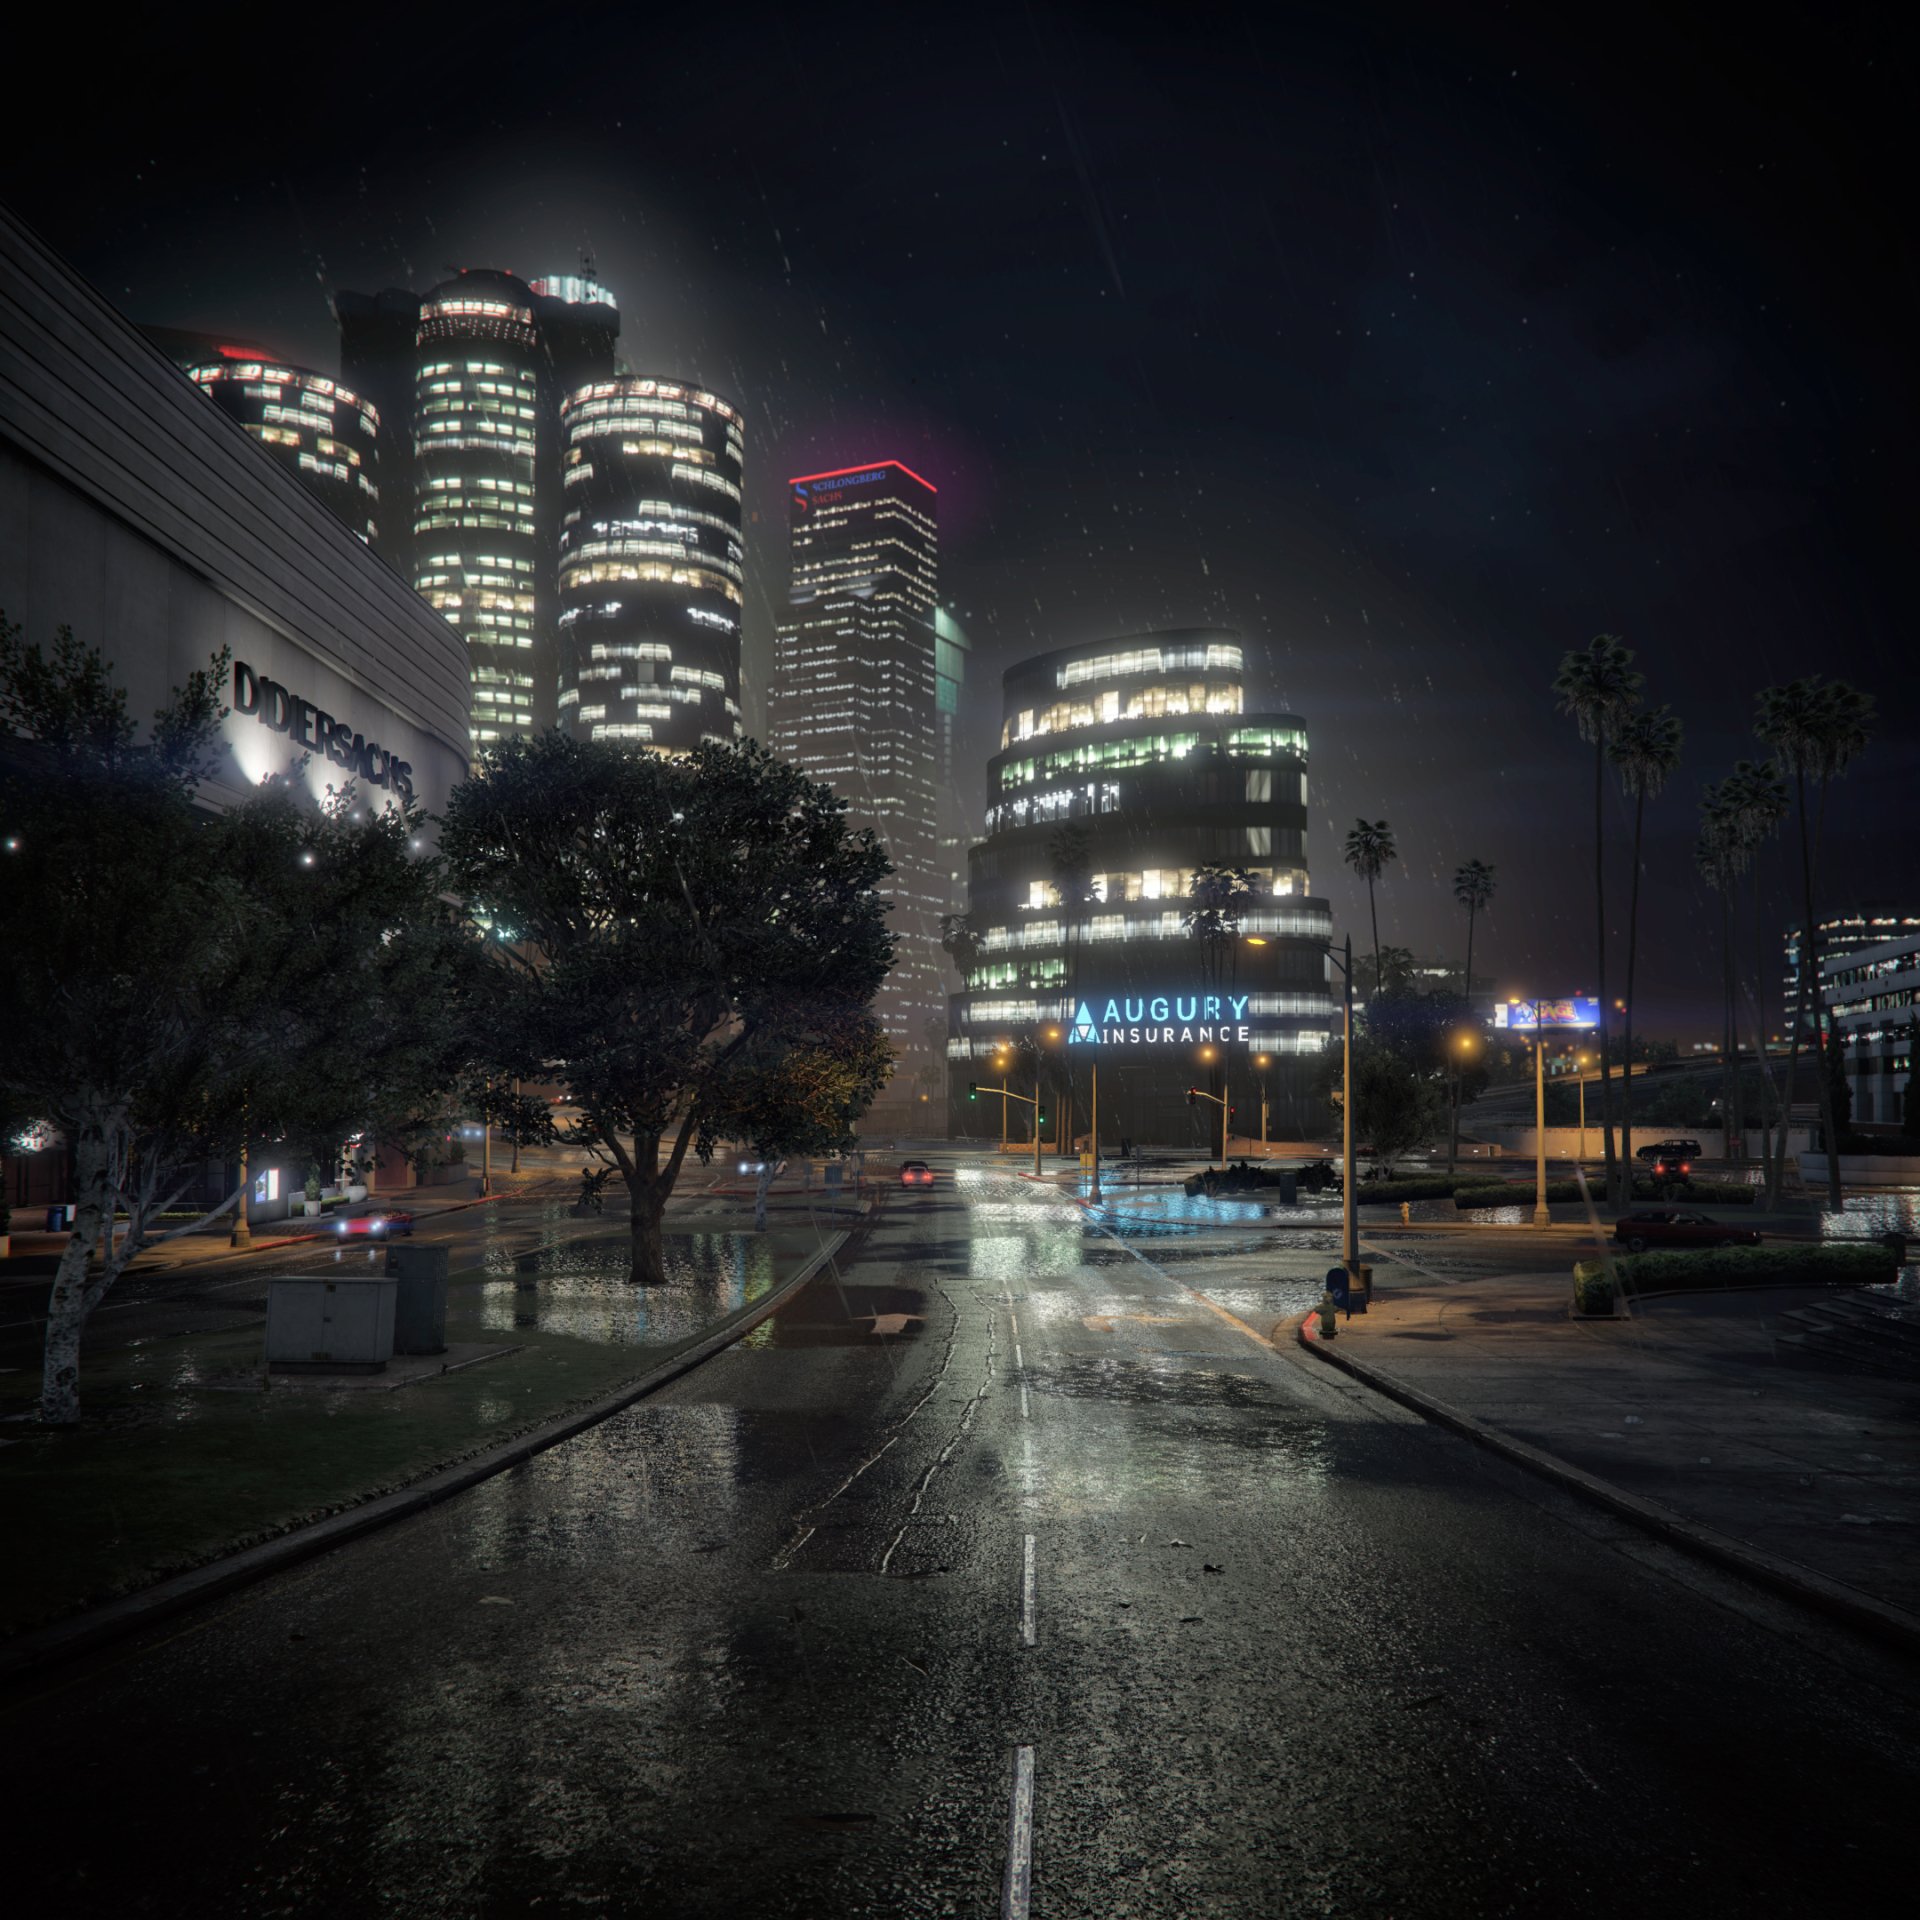 Grand Theft Auto V Picture - Image Abyss